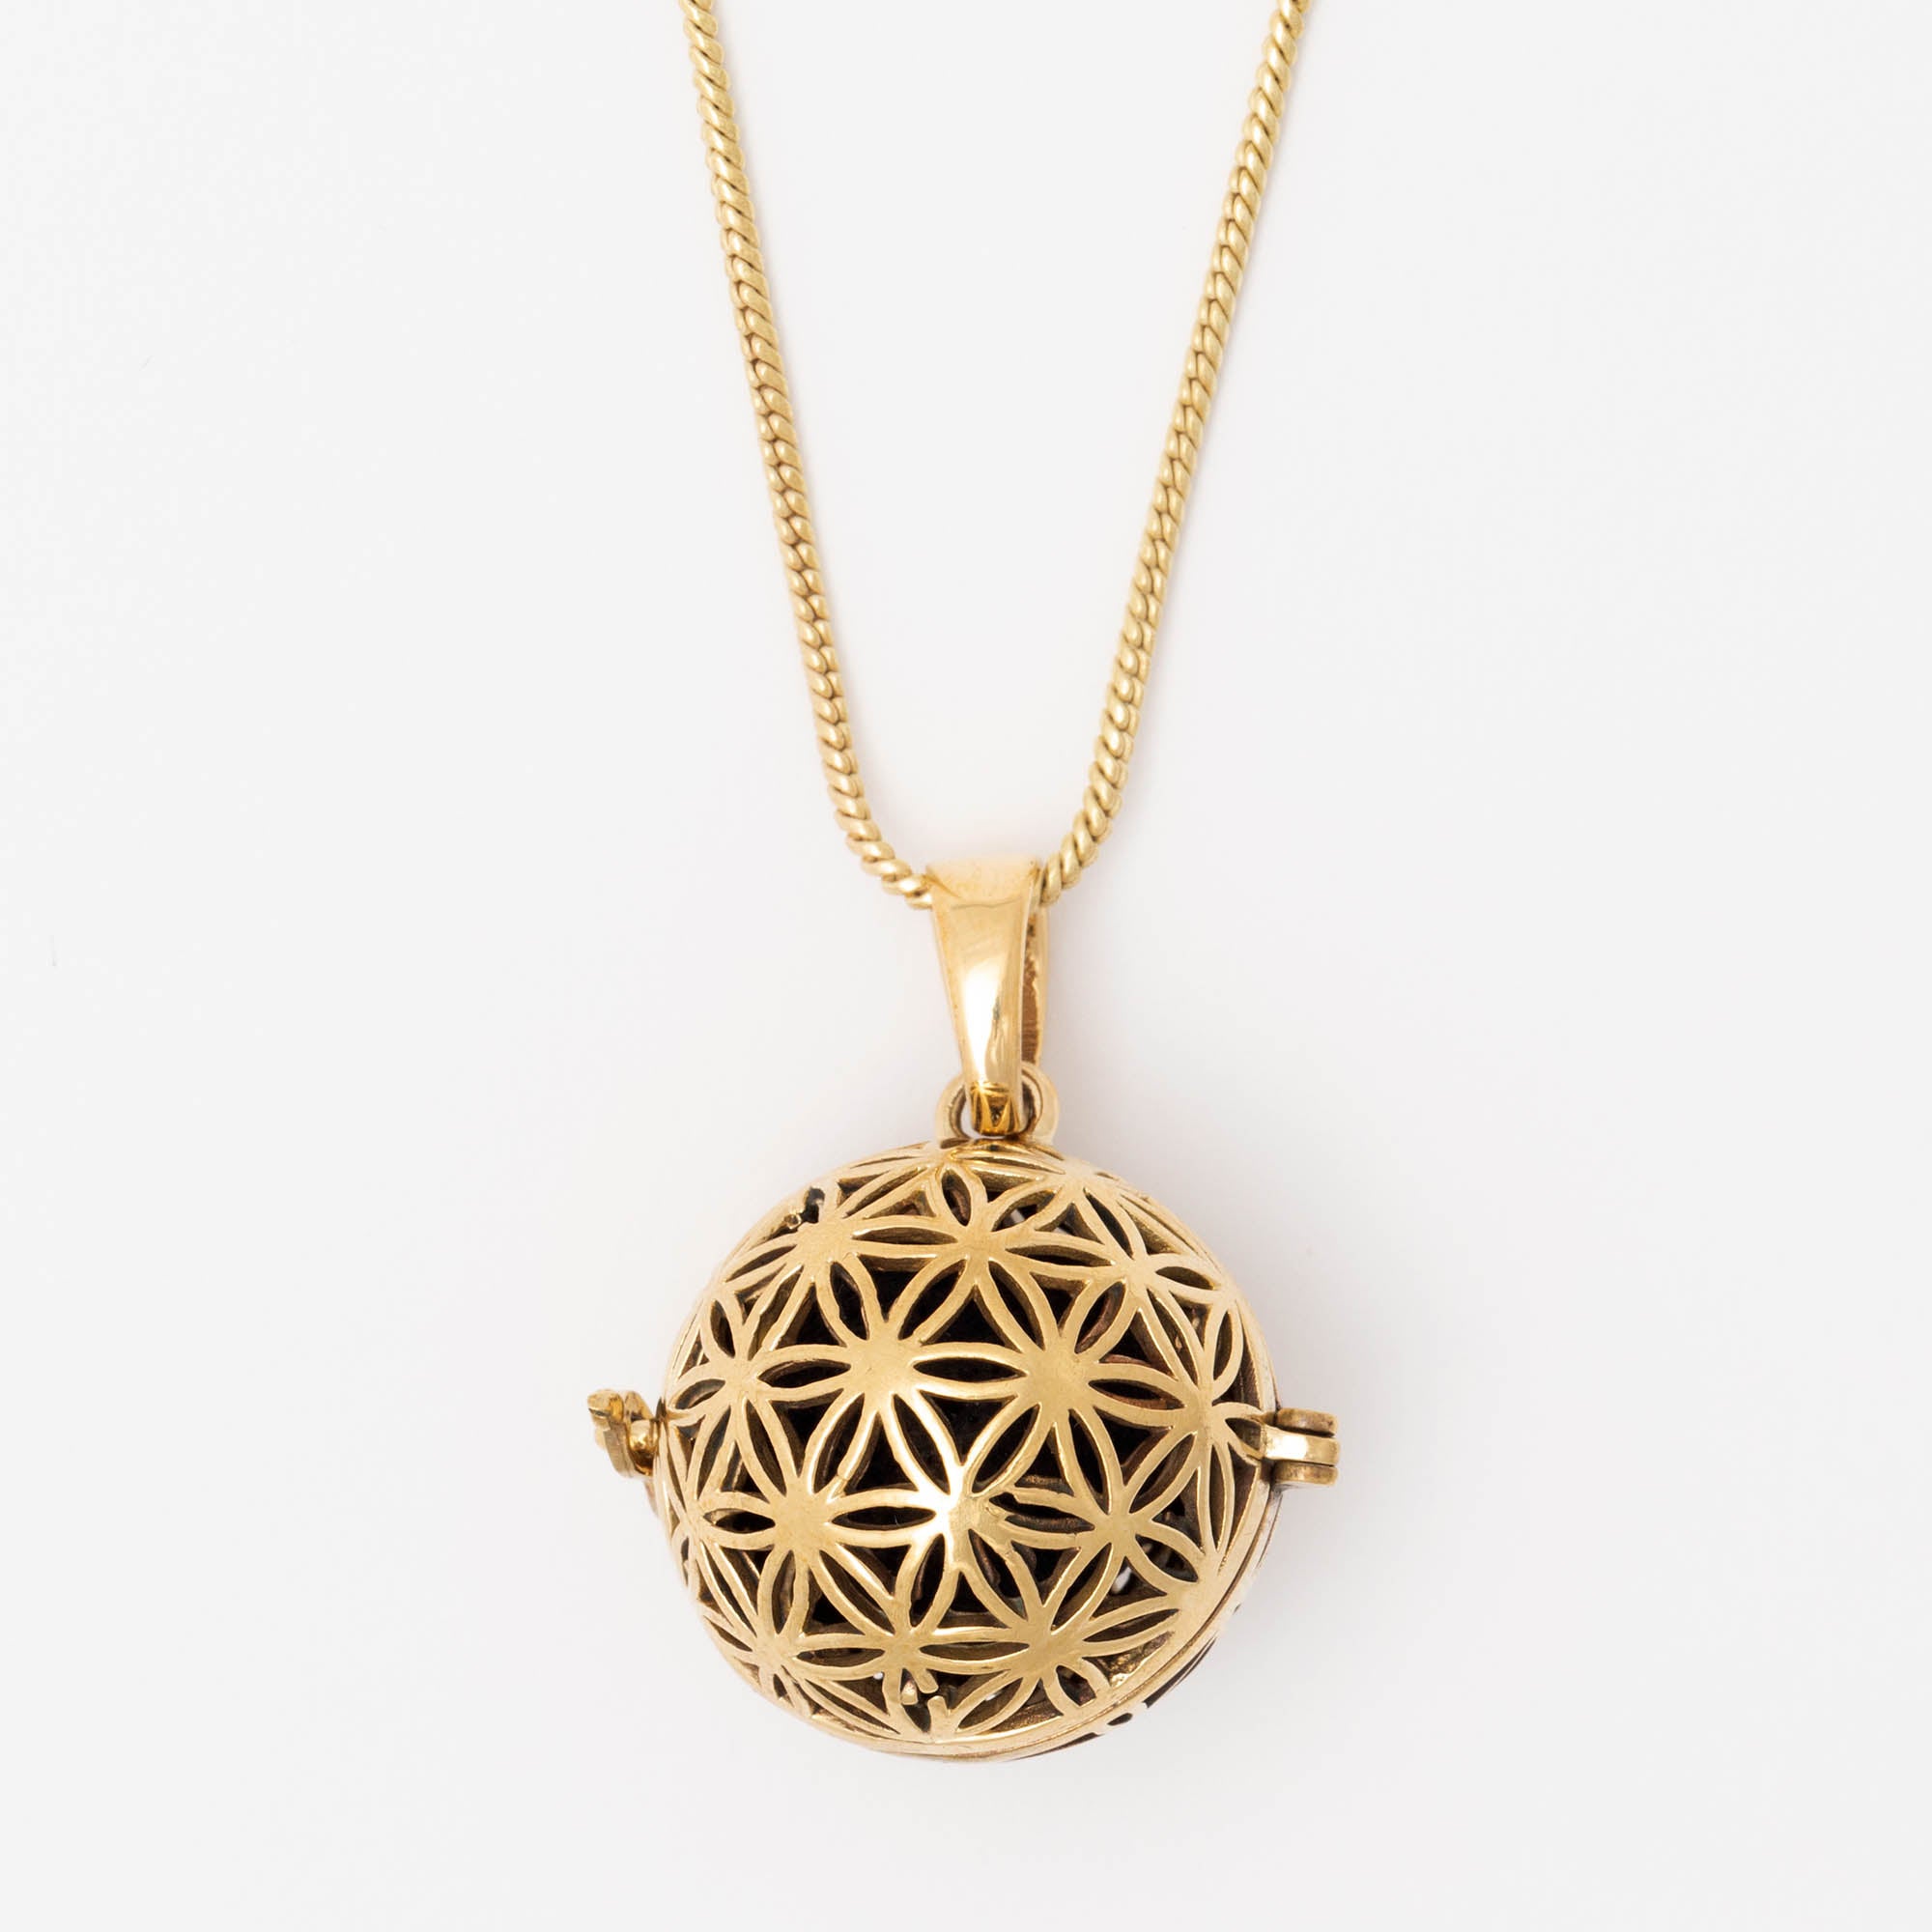 Lava Stone Diffuser Necklace - Flower Of Life